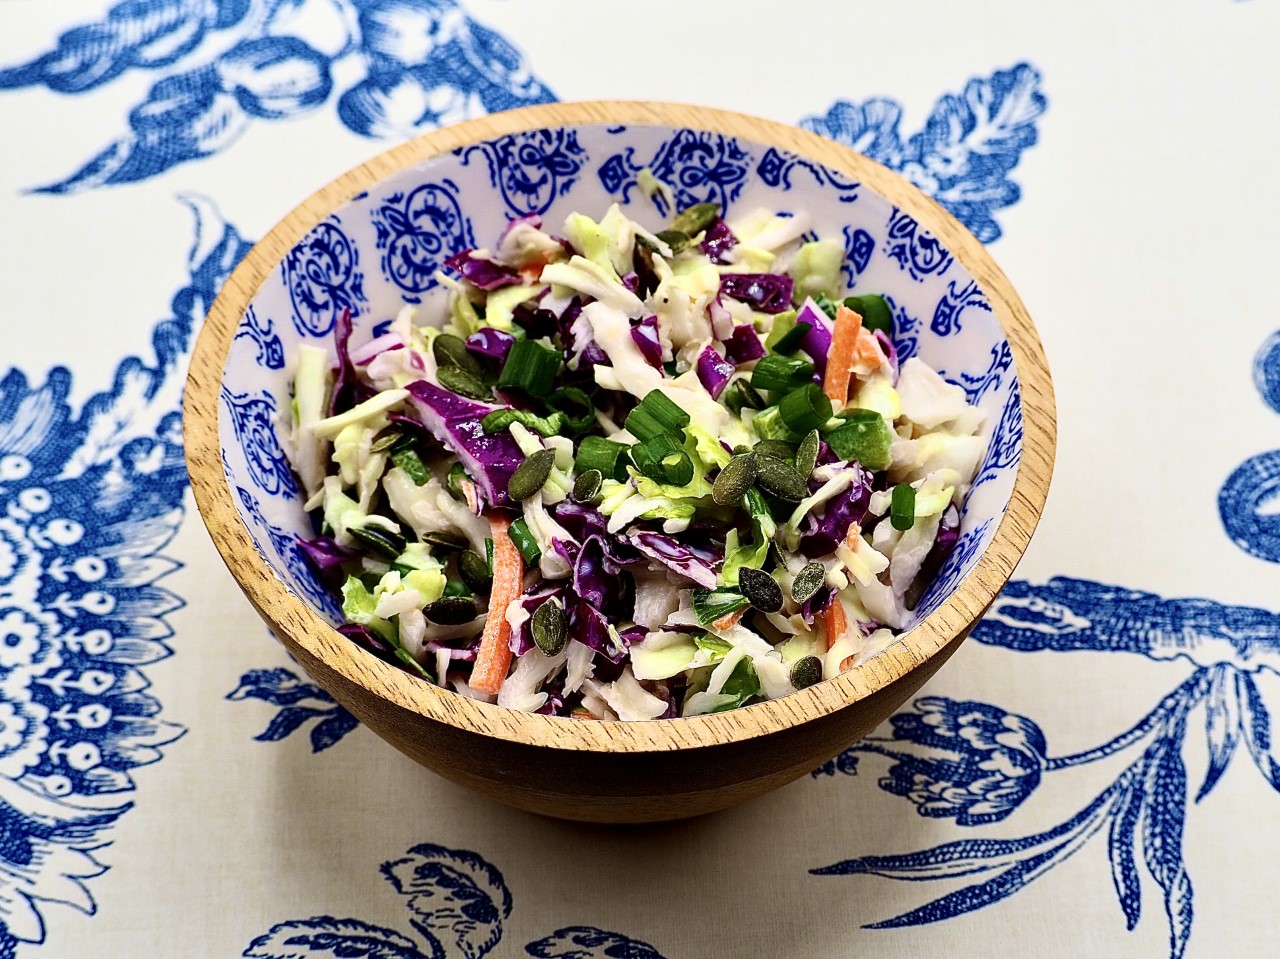 Spicy Crunchy Coleslaw with Homemade Mayonnaise